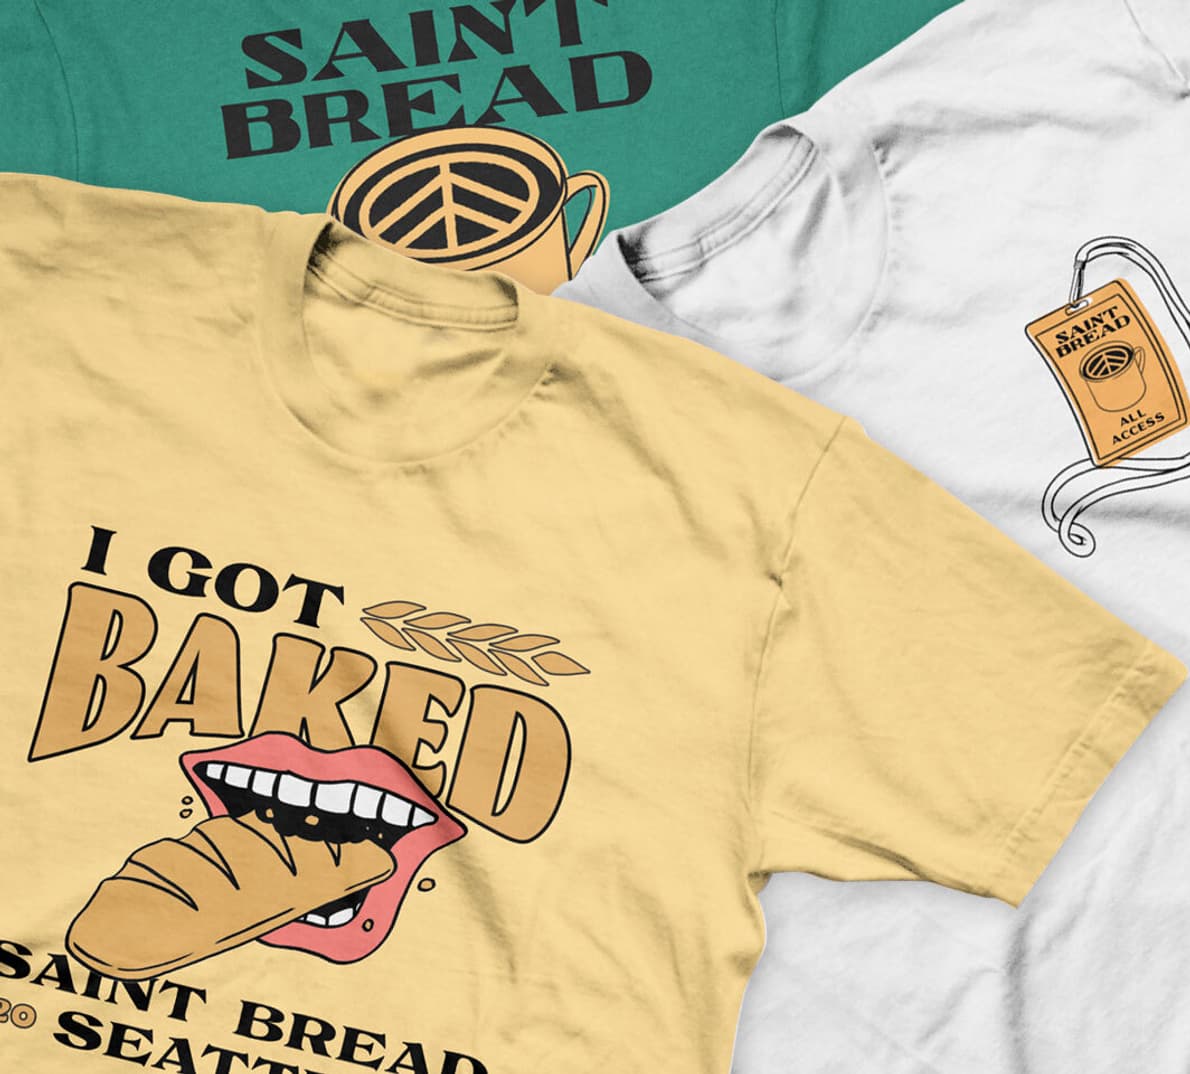 A collage of t-shirts with different Saint Bread designs on them.